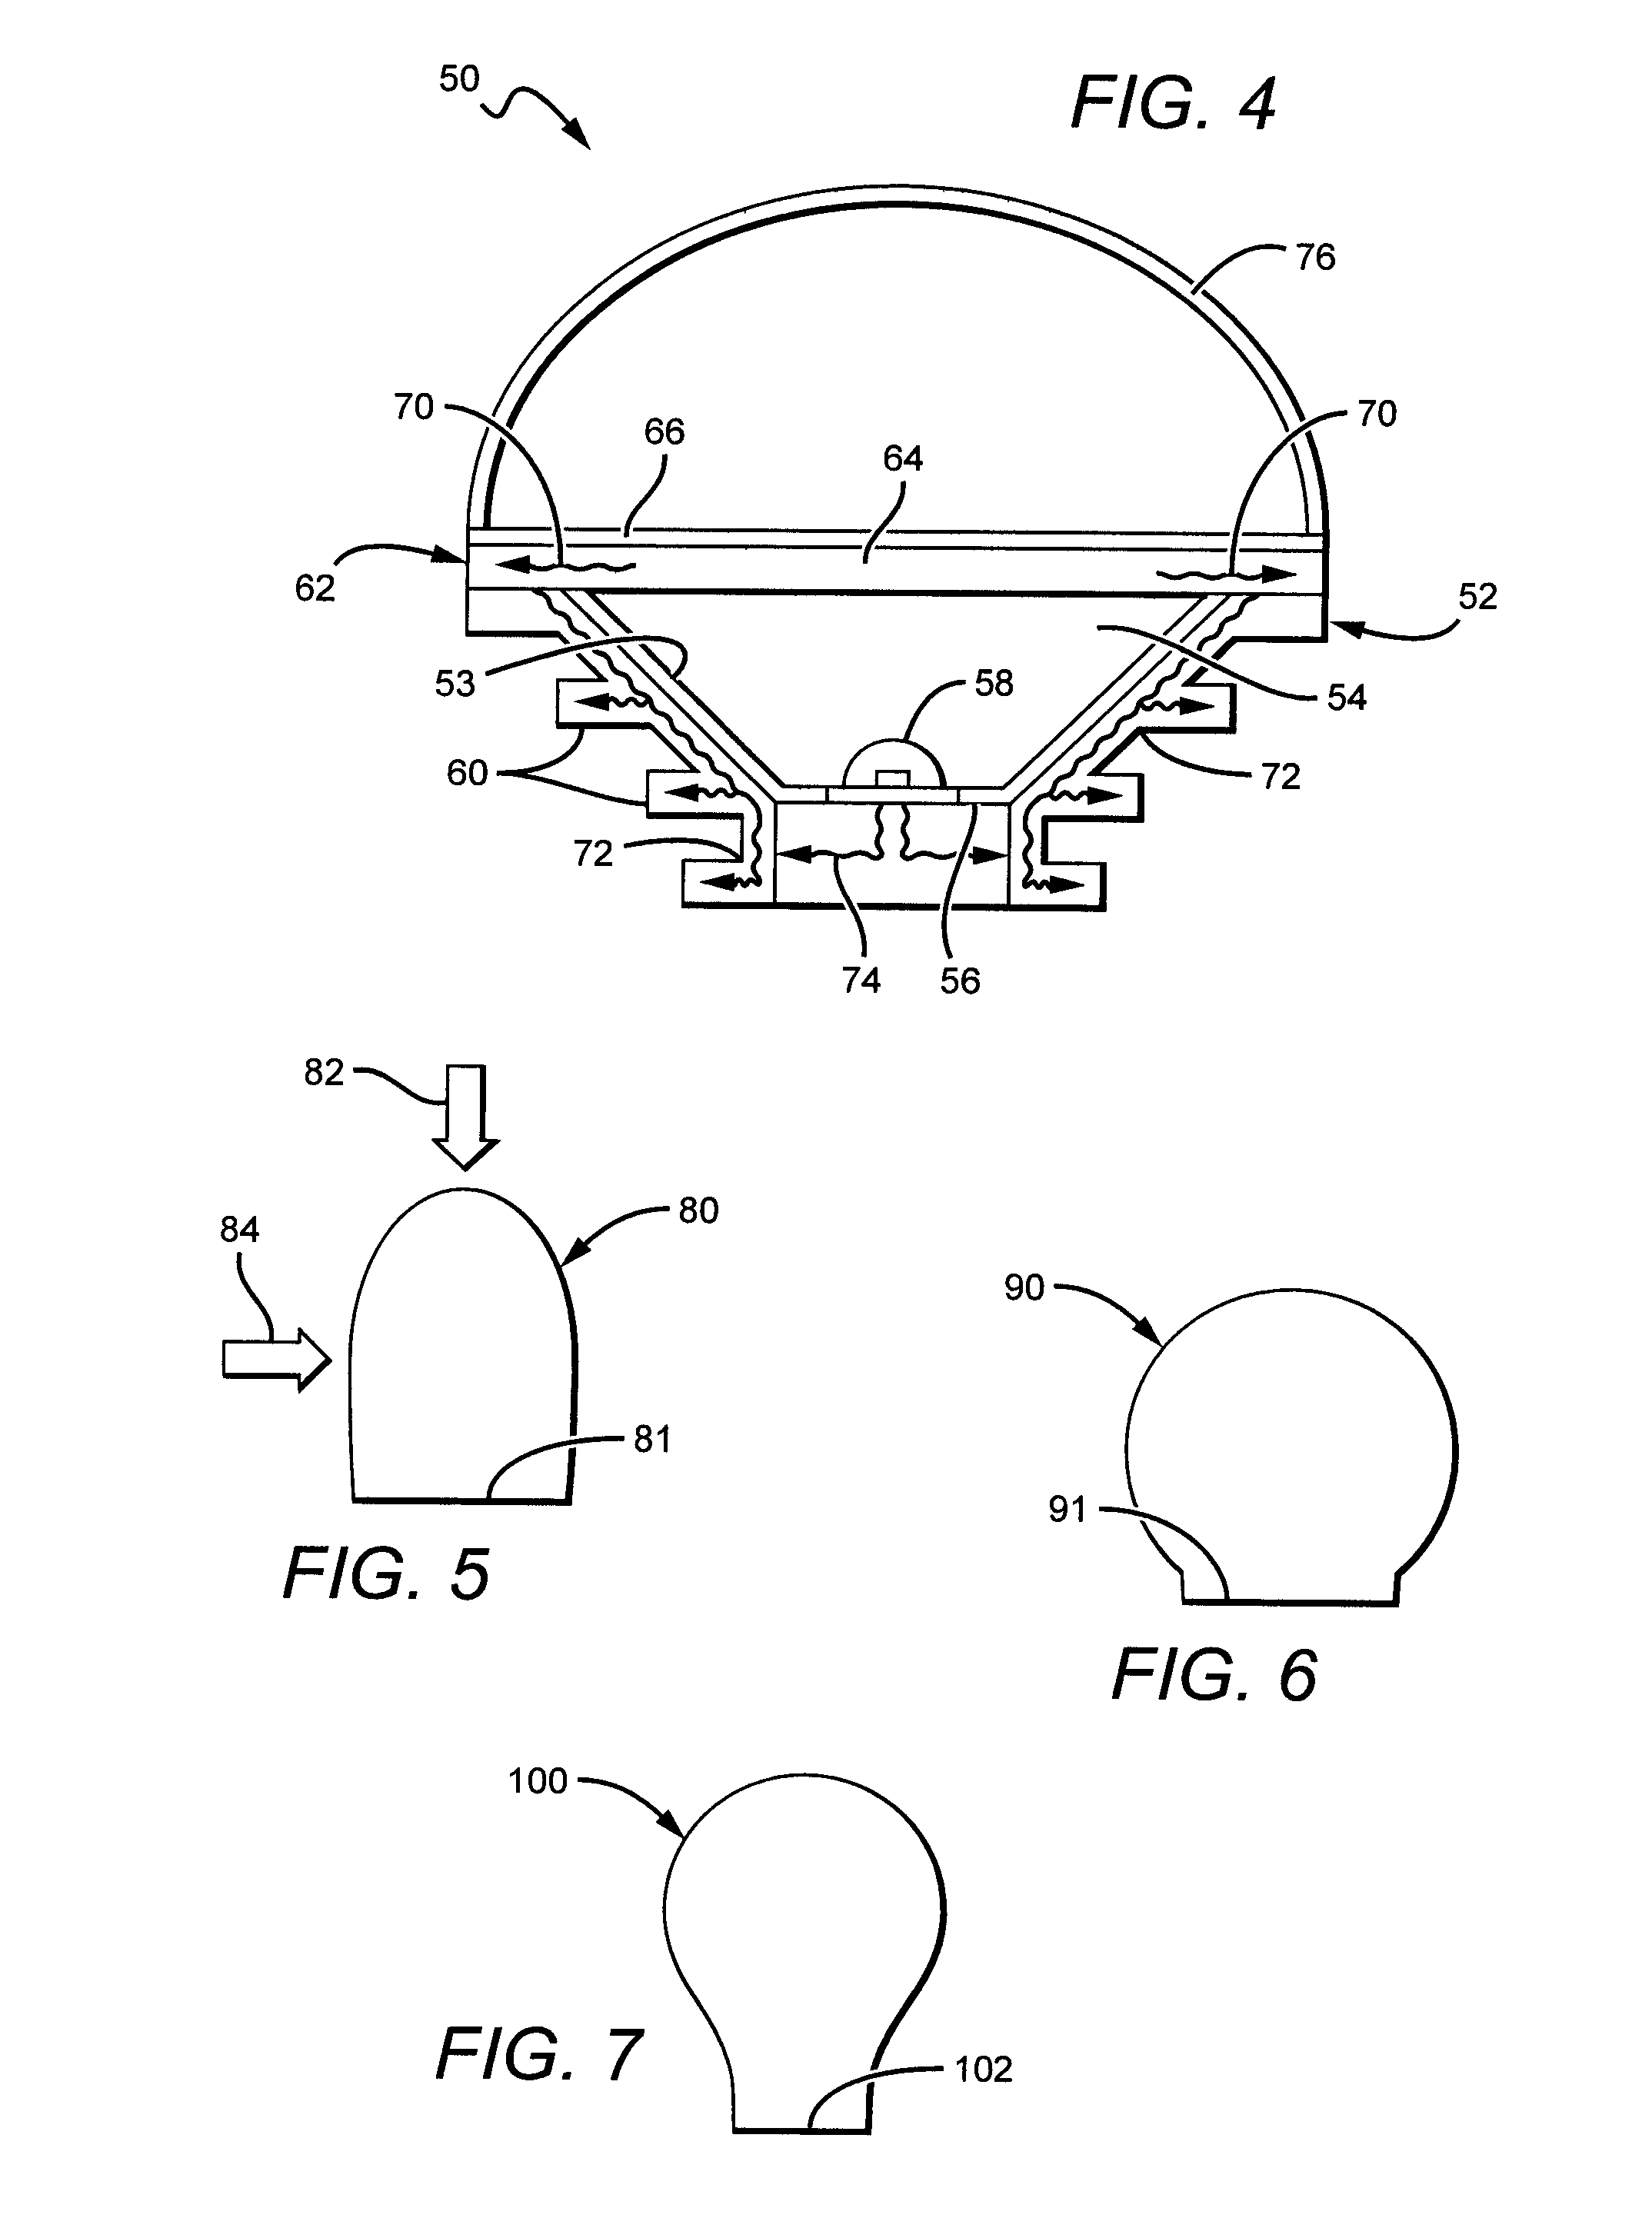 LED lamp or bulb with remote phosphor and diffuser configuration with enhanced scattering properties